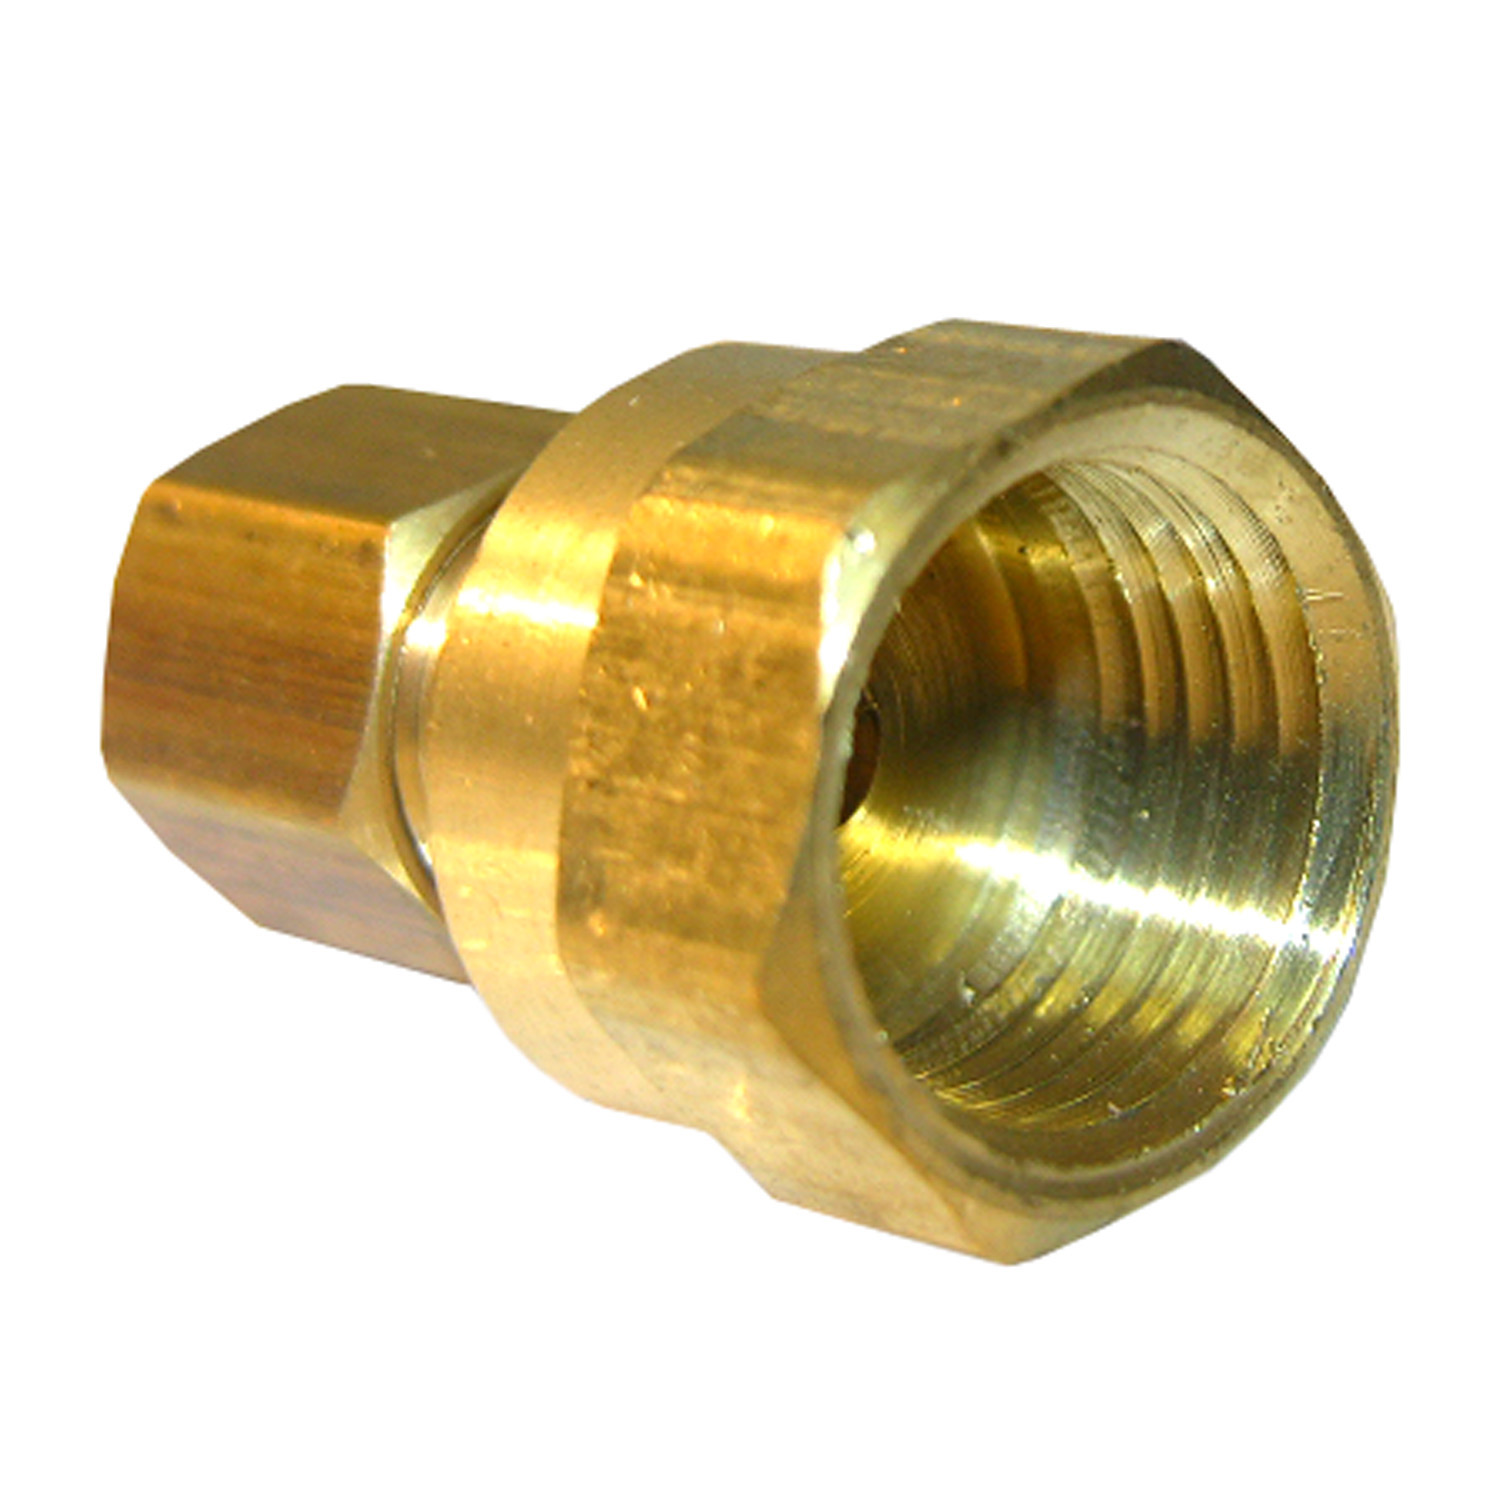 17-6615 Pipe Adapter, 1/4 x 3/8 in, Compression x FPT, Brass, 150 psi Pressure